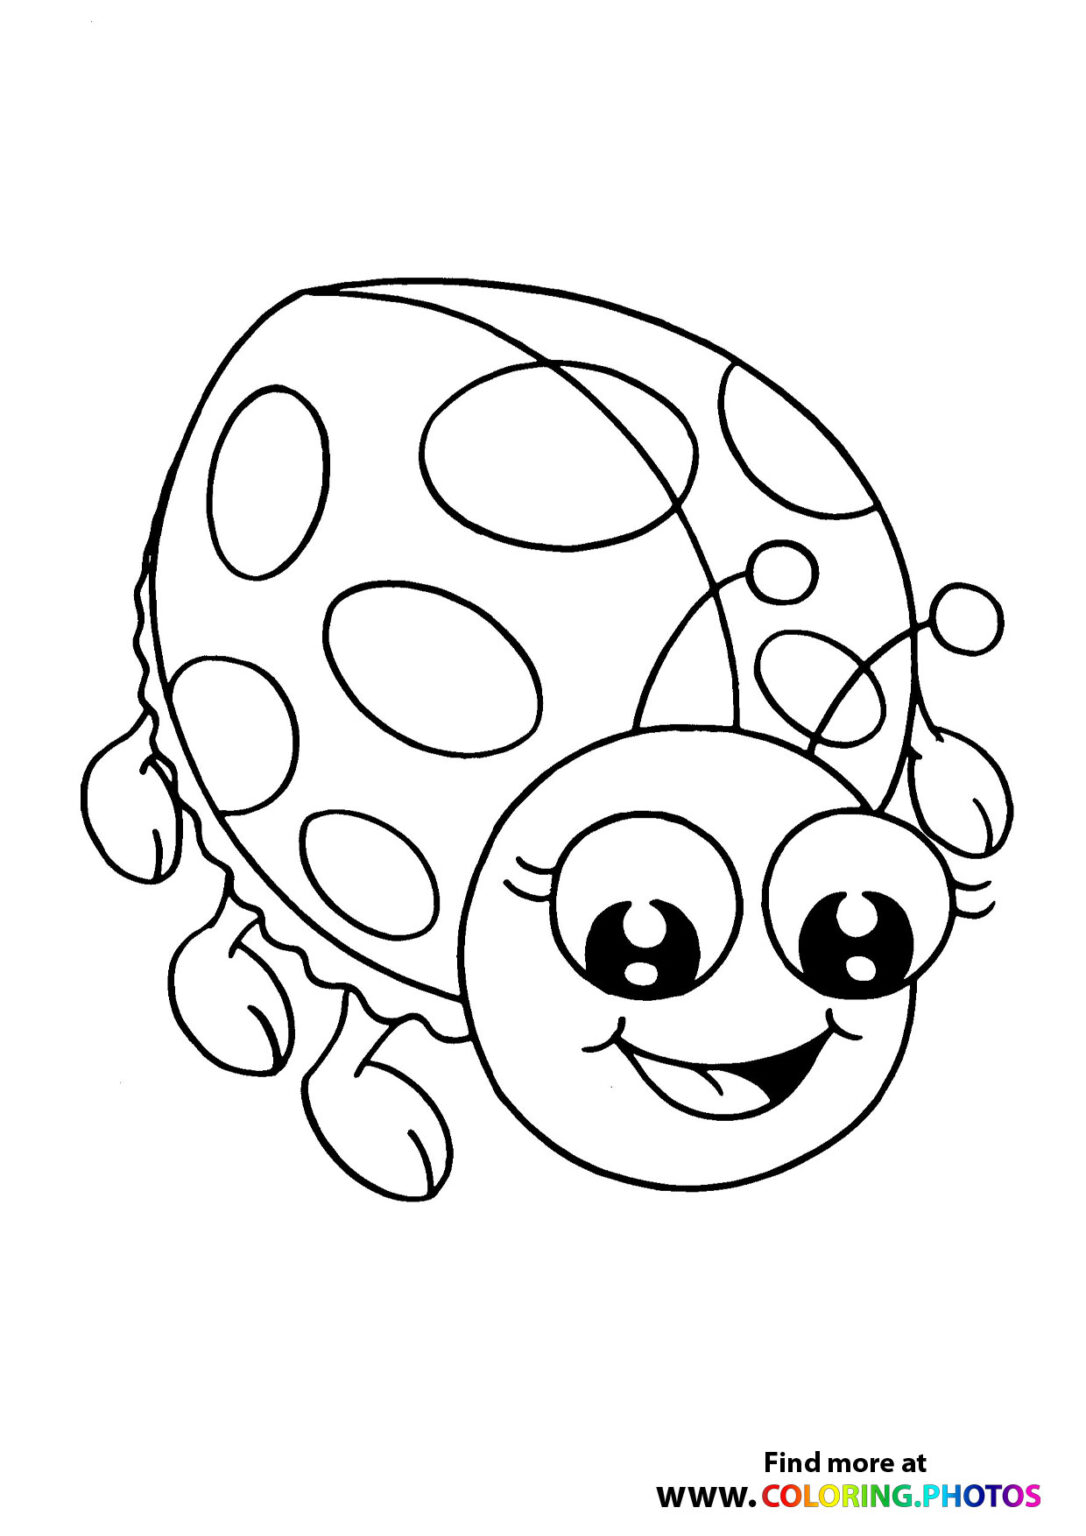 Ladybug smiling - Coloring Pages for kids